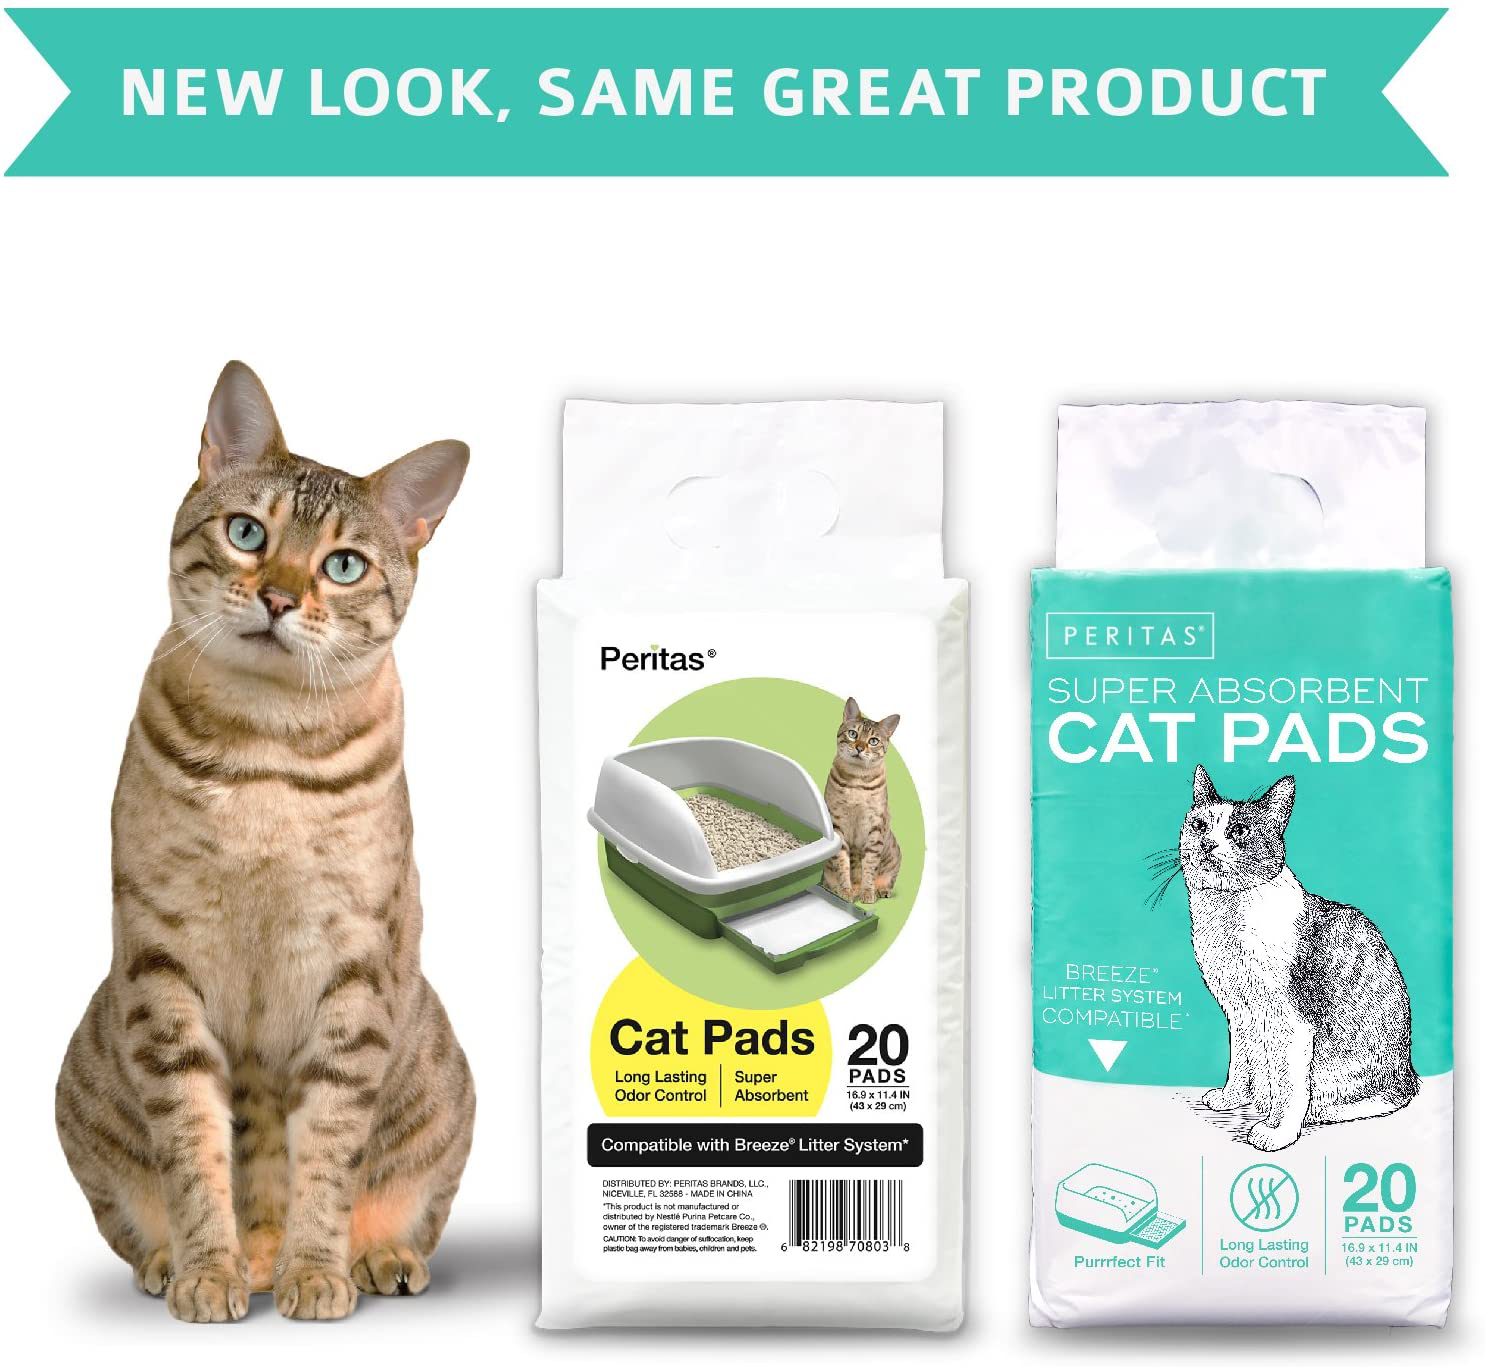 Peritas Cat Pads | Generic Refill for Breeze Tidy Cat Litter System | Cat Liner Pads for Litter Box | Quick-Dry, Super Absorbent, Leak Proof | 16.9"X11.4" (80 Count)